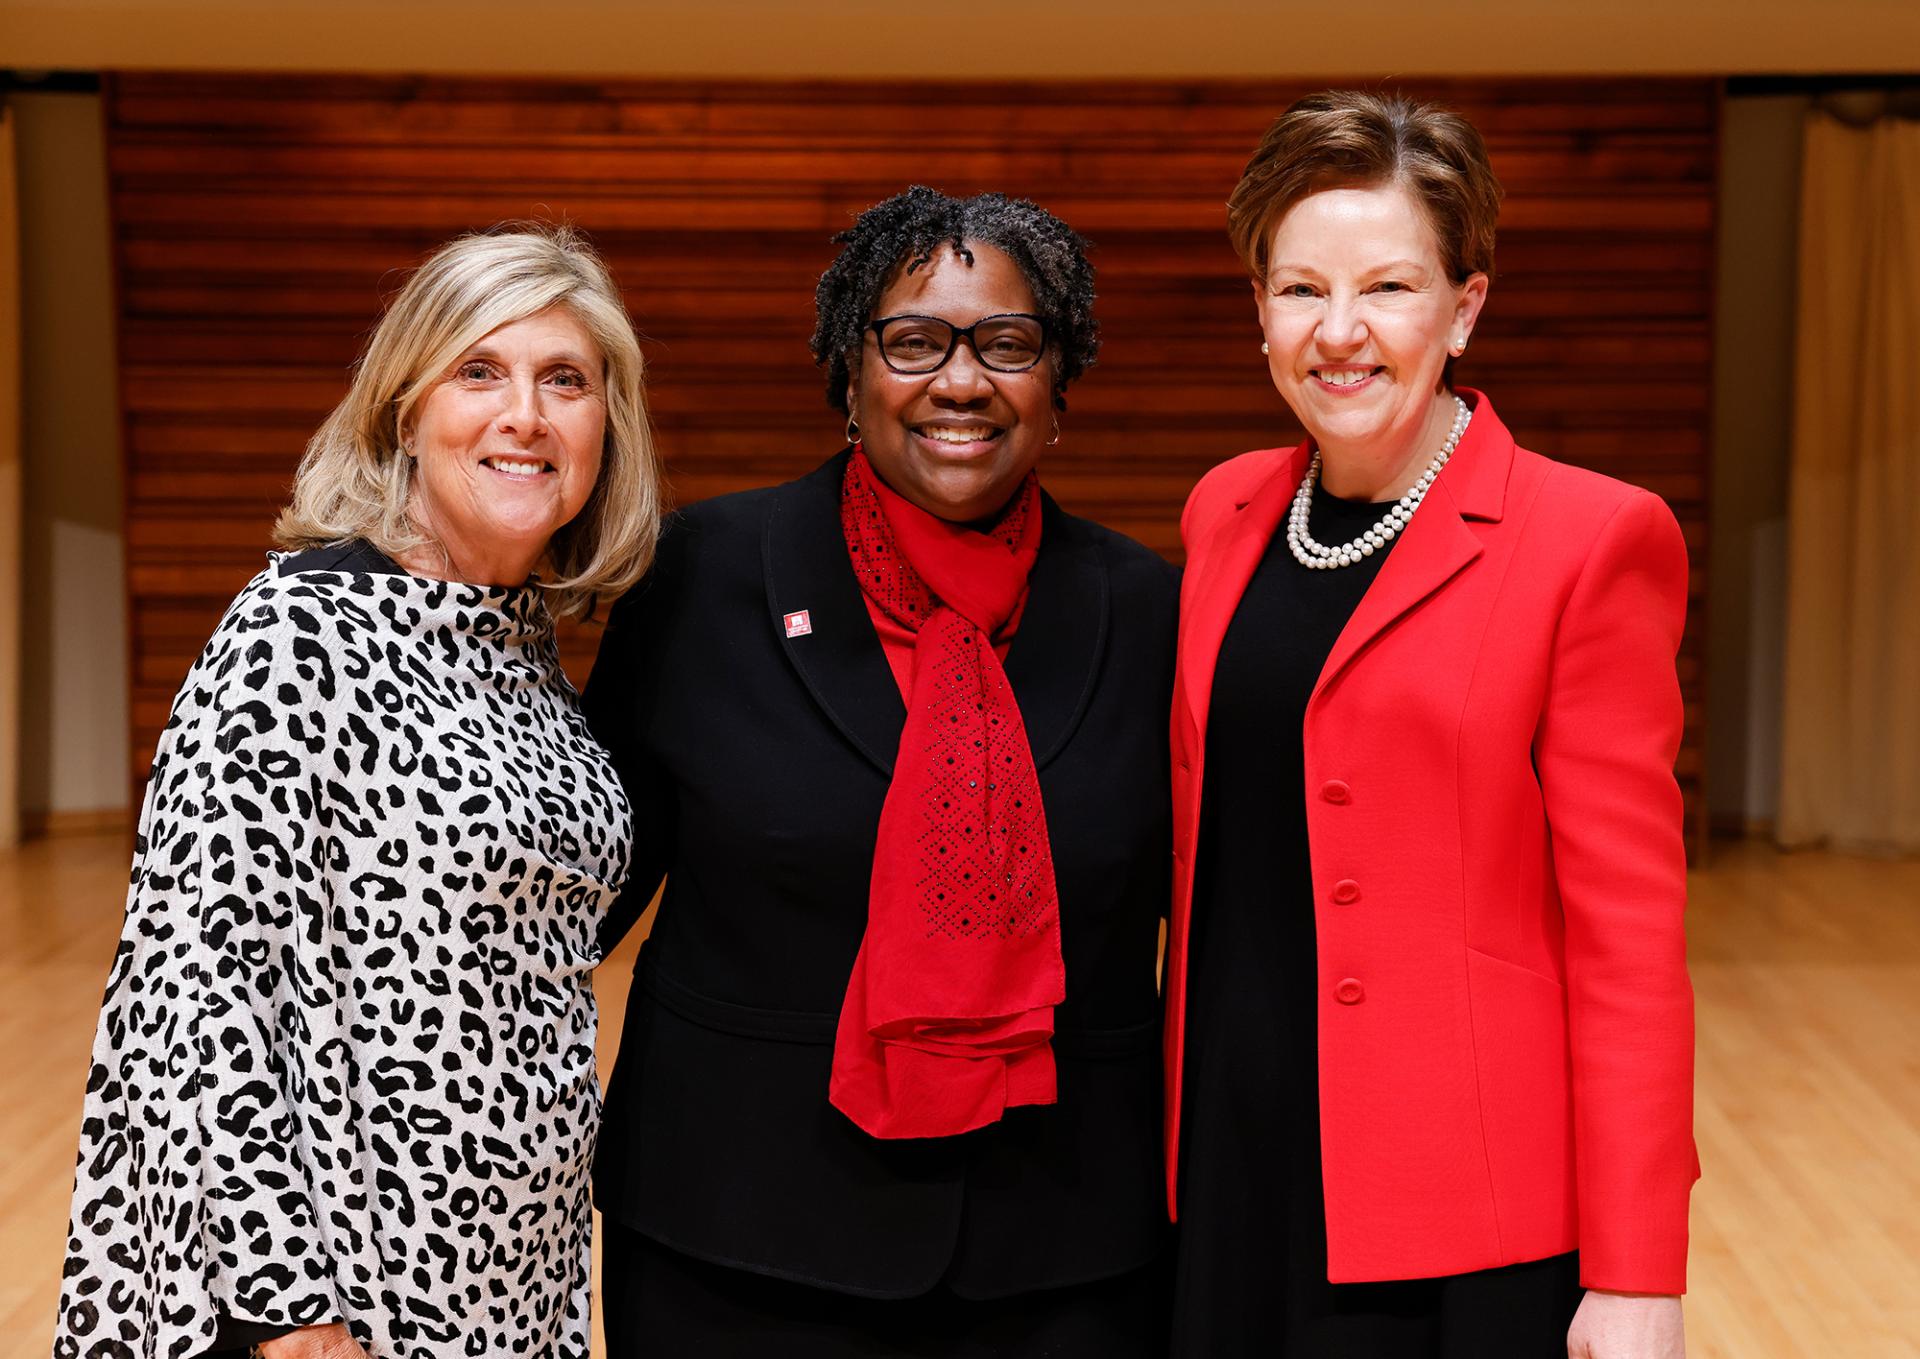 From left to right: Dr. Kathryn Birkett, Dr. Anita Thomas and Dr. Holly Humphrey.